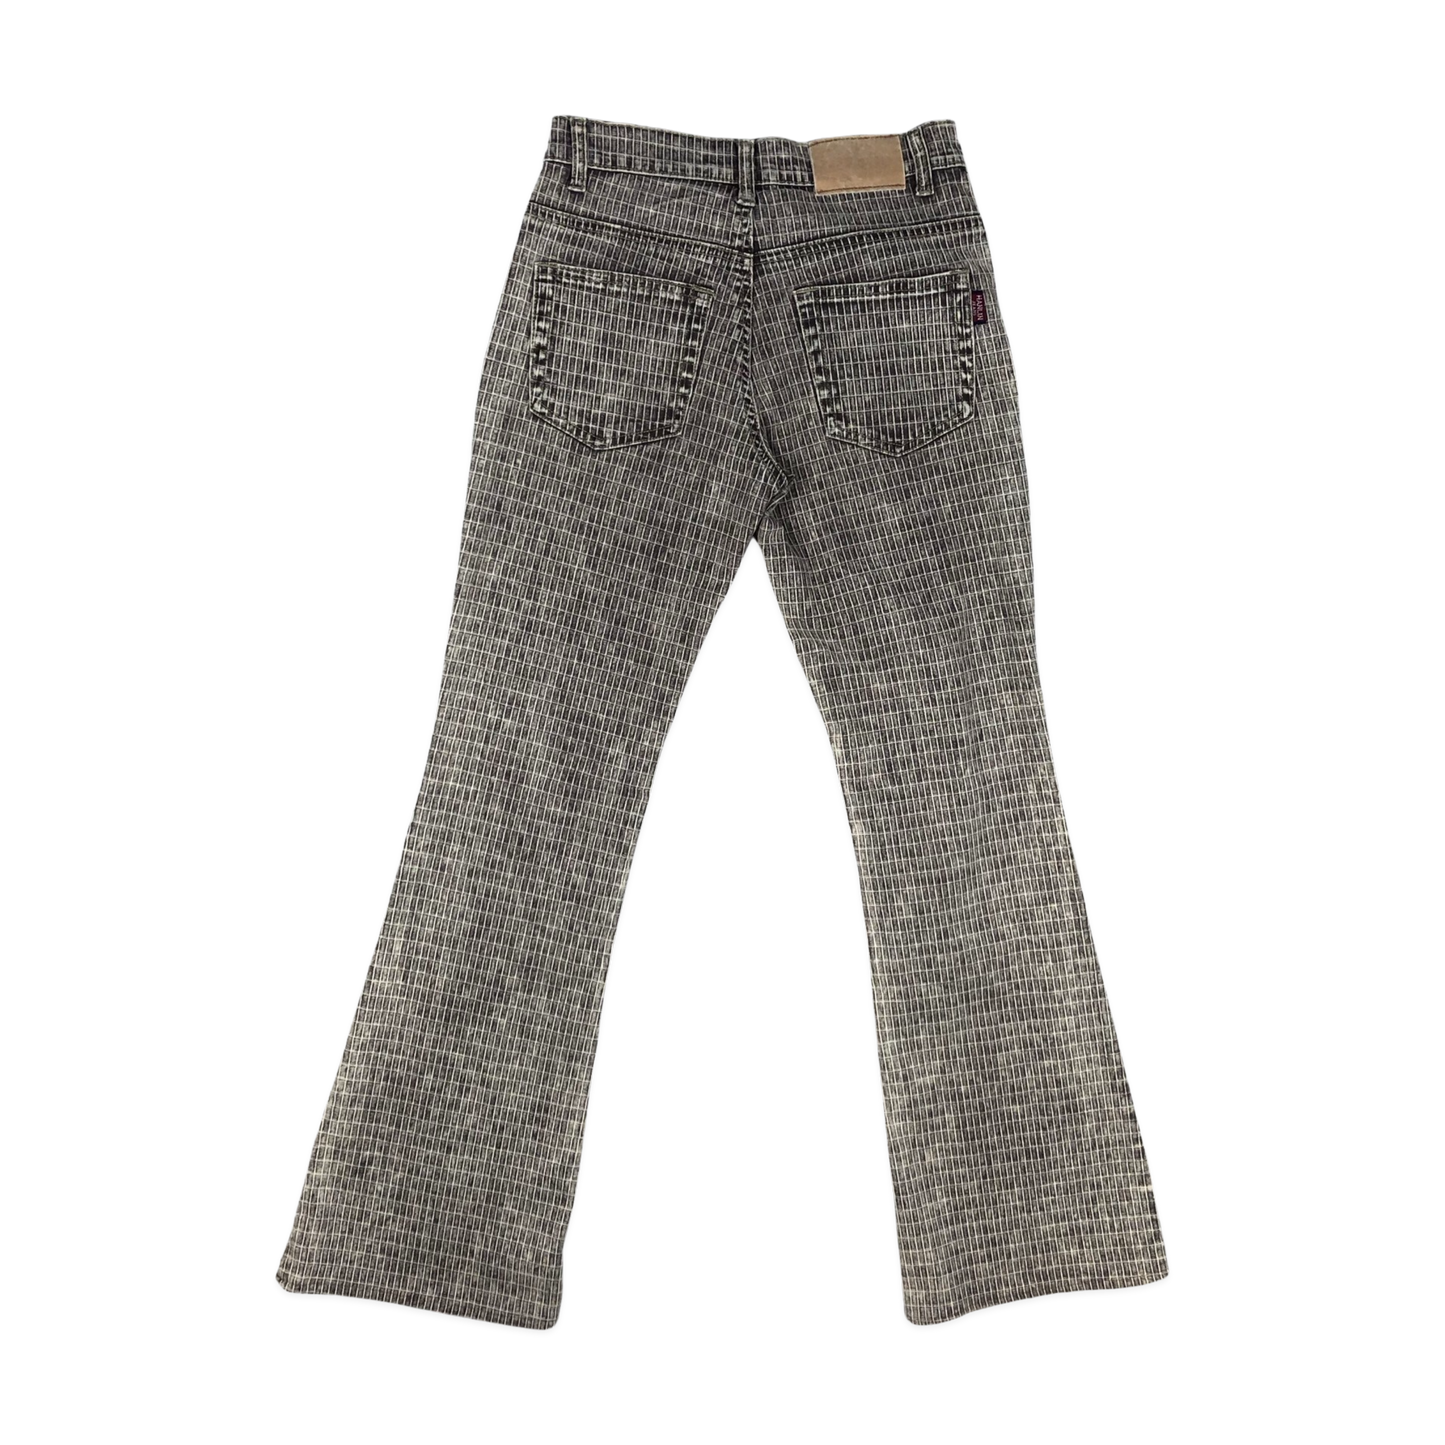 Vintage Textured Flared Trousers 27W 29L